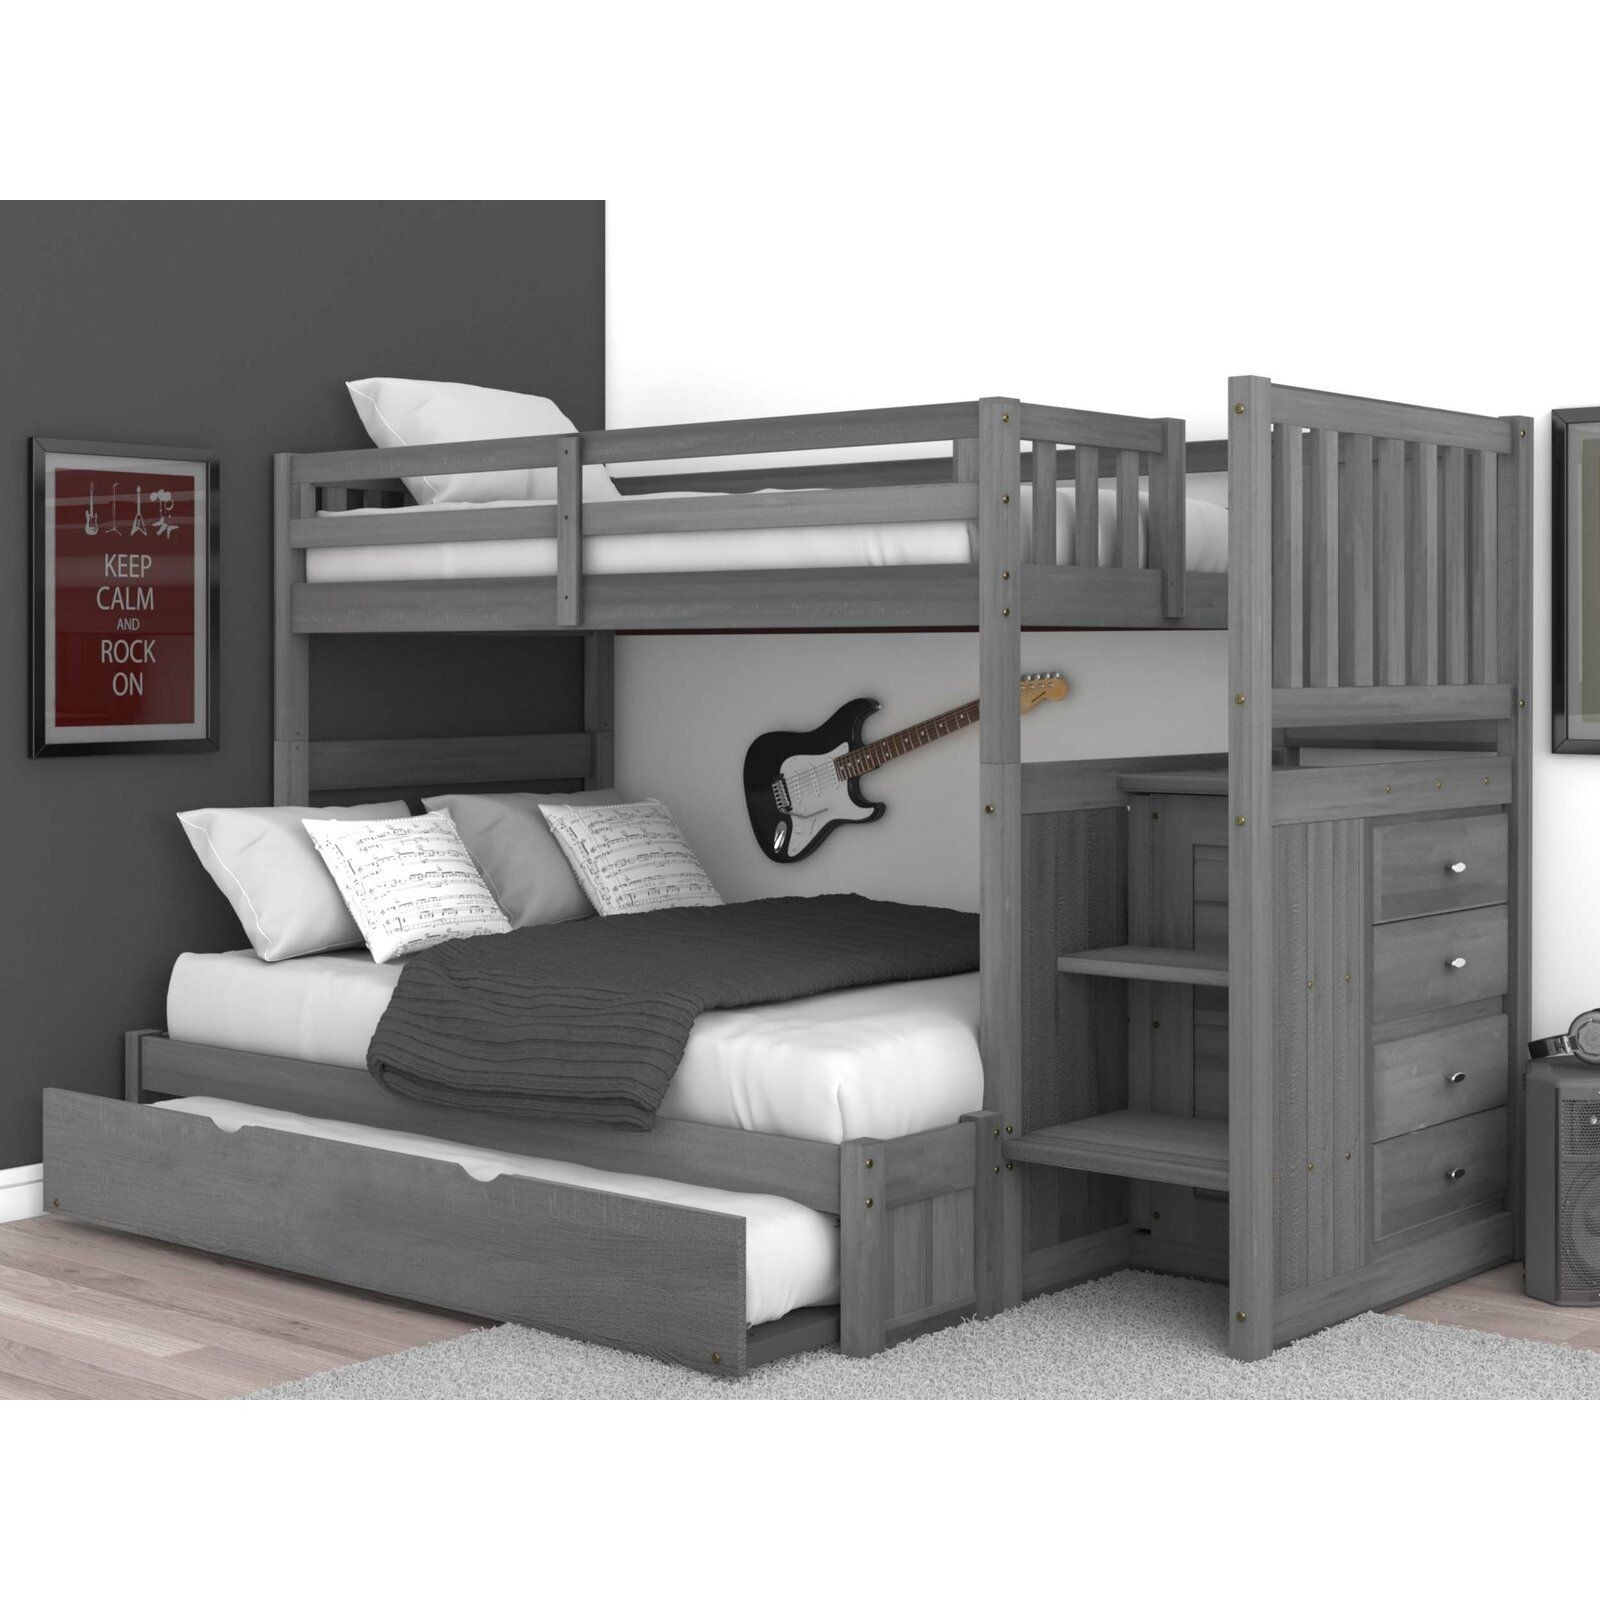 Sandberg bunk bed with trundle and drawers in 2020 bunk